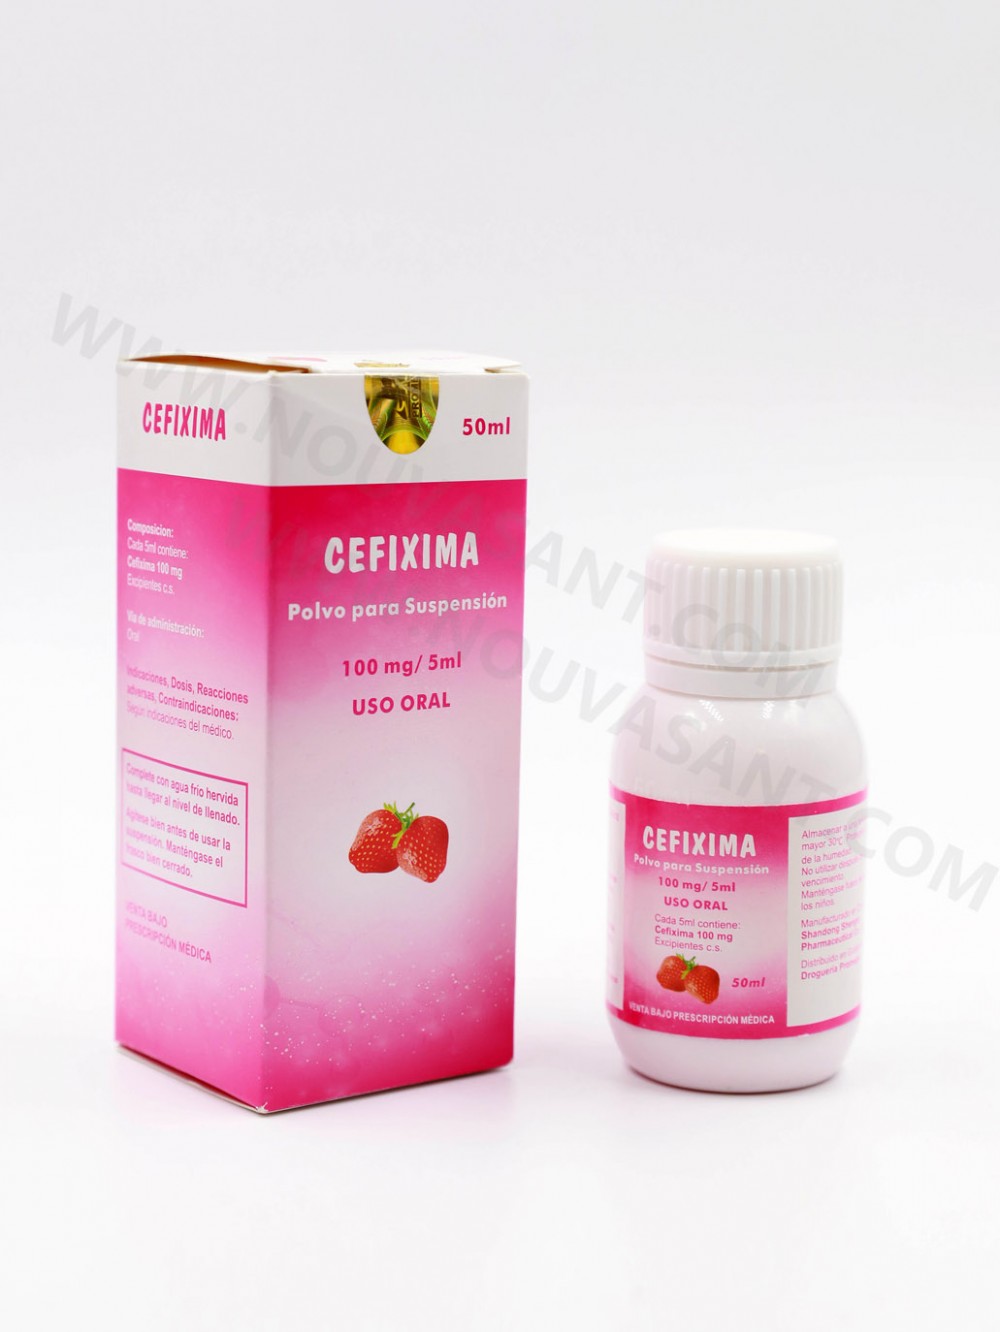 Cefixime for Oral Suspension 100mg/5ml, 50ml 头孢克肟混悬液